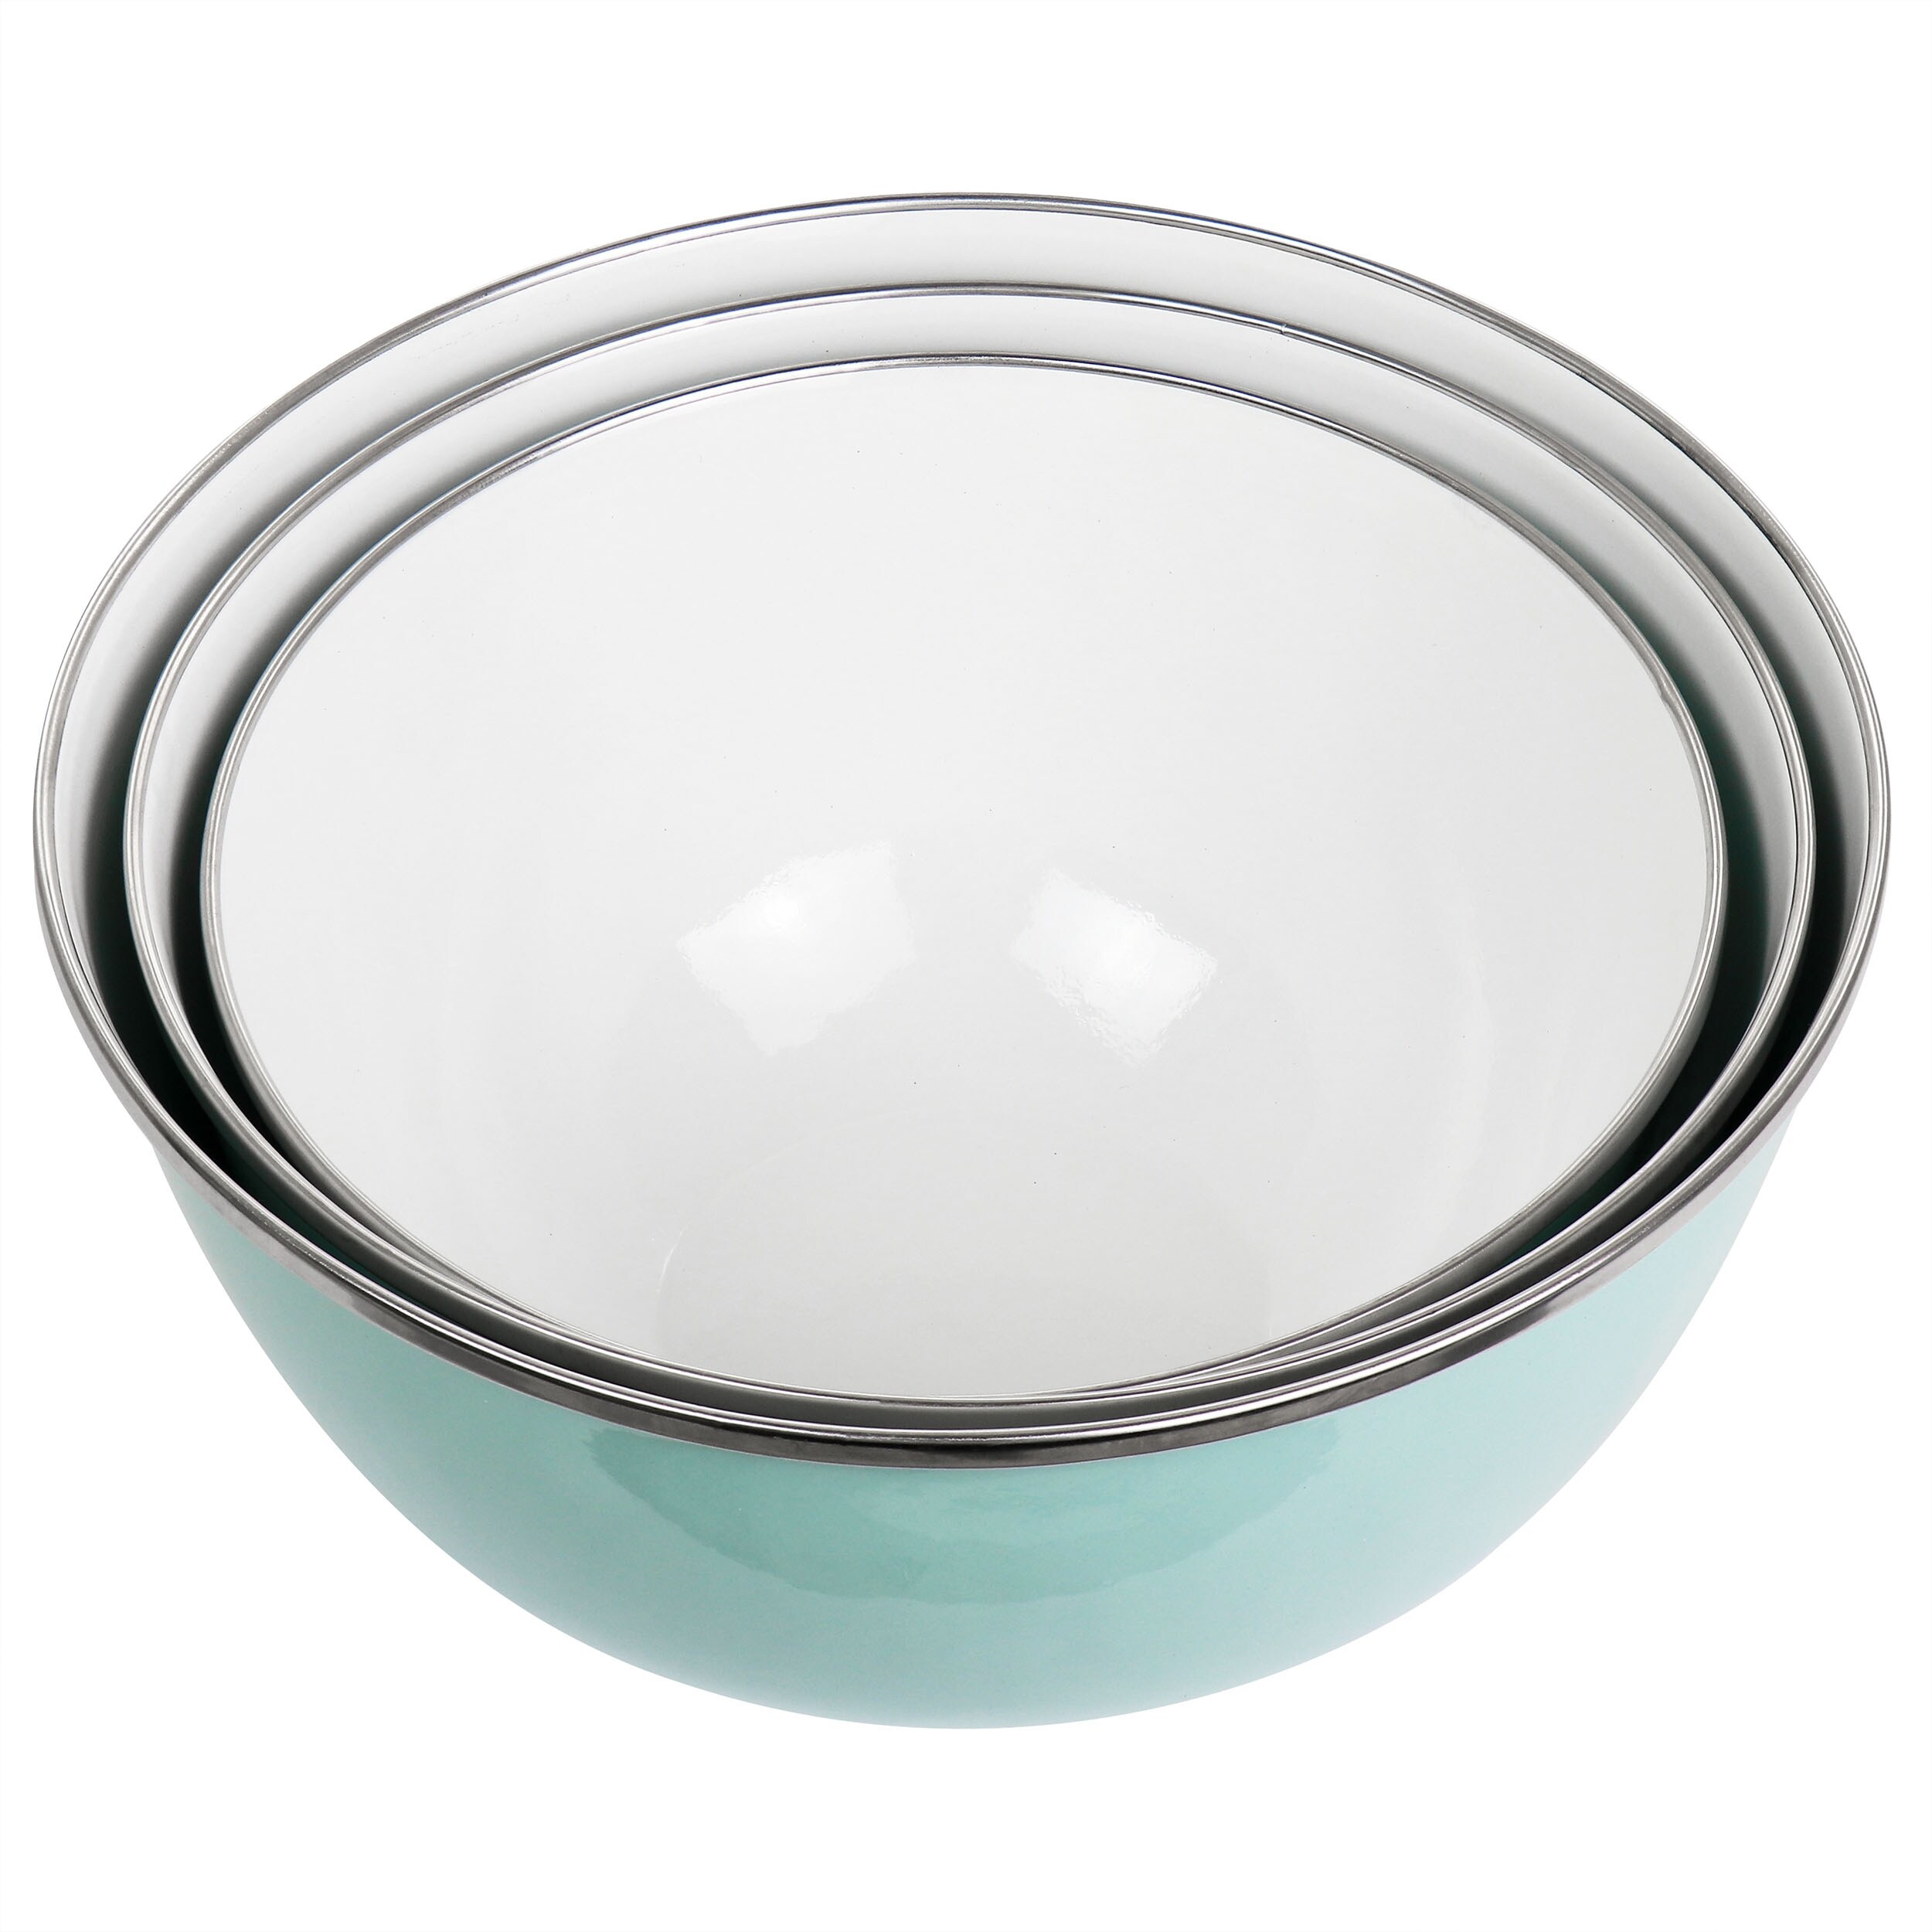 https://ak1.ostkcdn.com/images/products/is/images/direct/3af770be315d3f83c77d35222b7c36e70026c697/Martha-Stewart-6-Piece-Enamel-Mixing-Bowl-and-Lid-Set.jpg